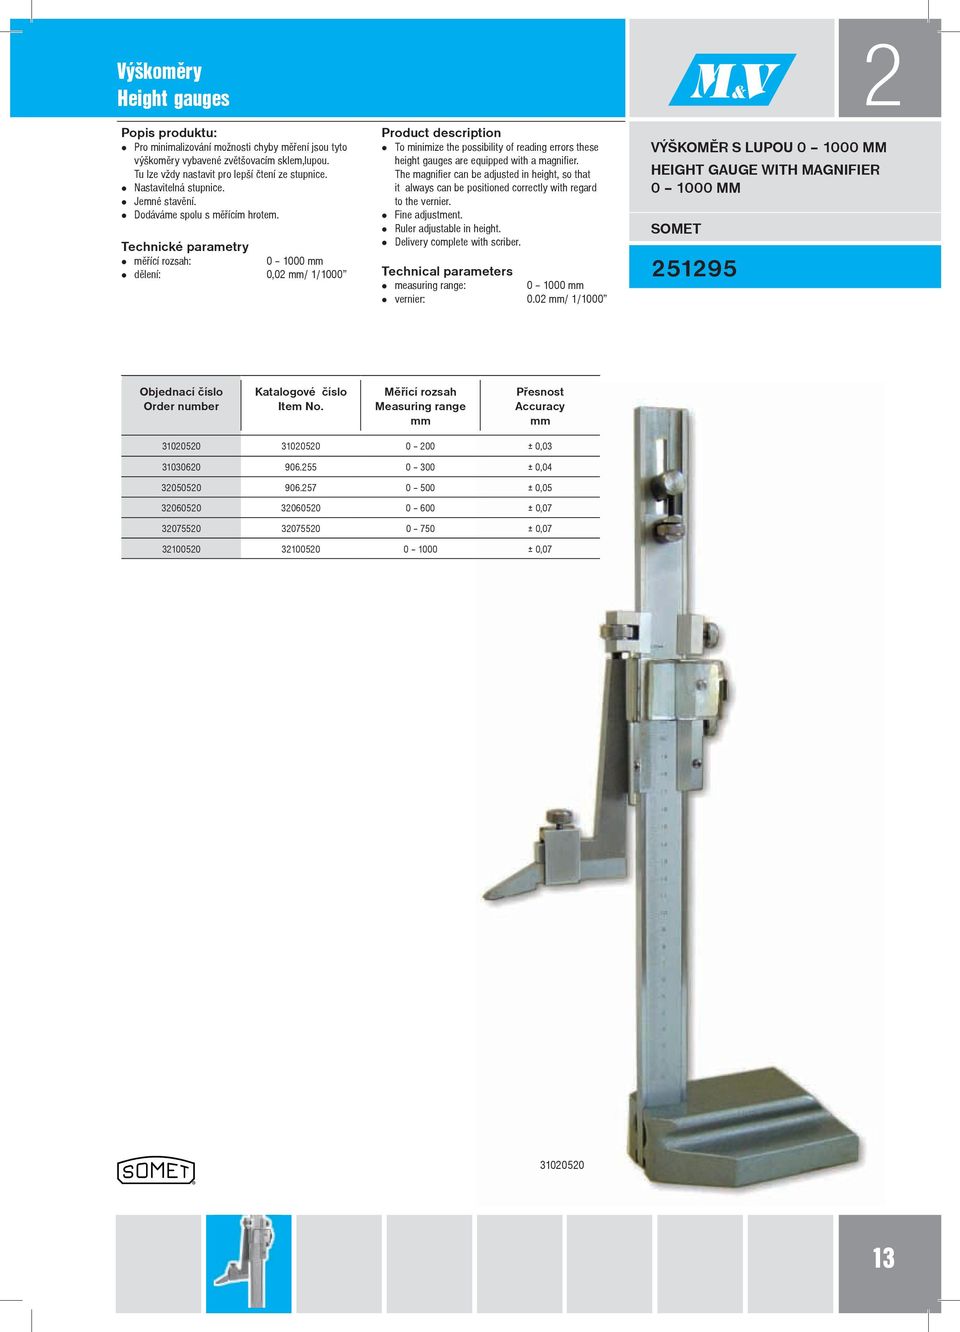 The magnifier can be adjusted in height, so that it always can be positioned correctly with regard to the vernier. Fine adjustment. Ruler adjustable in height. Delivery complete with scriber.